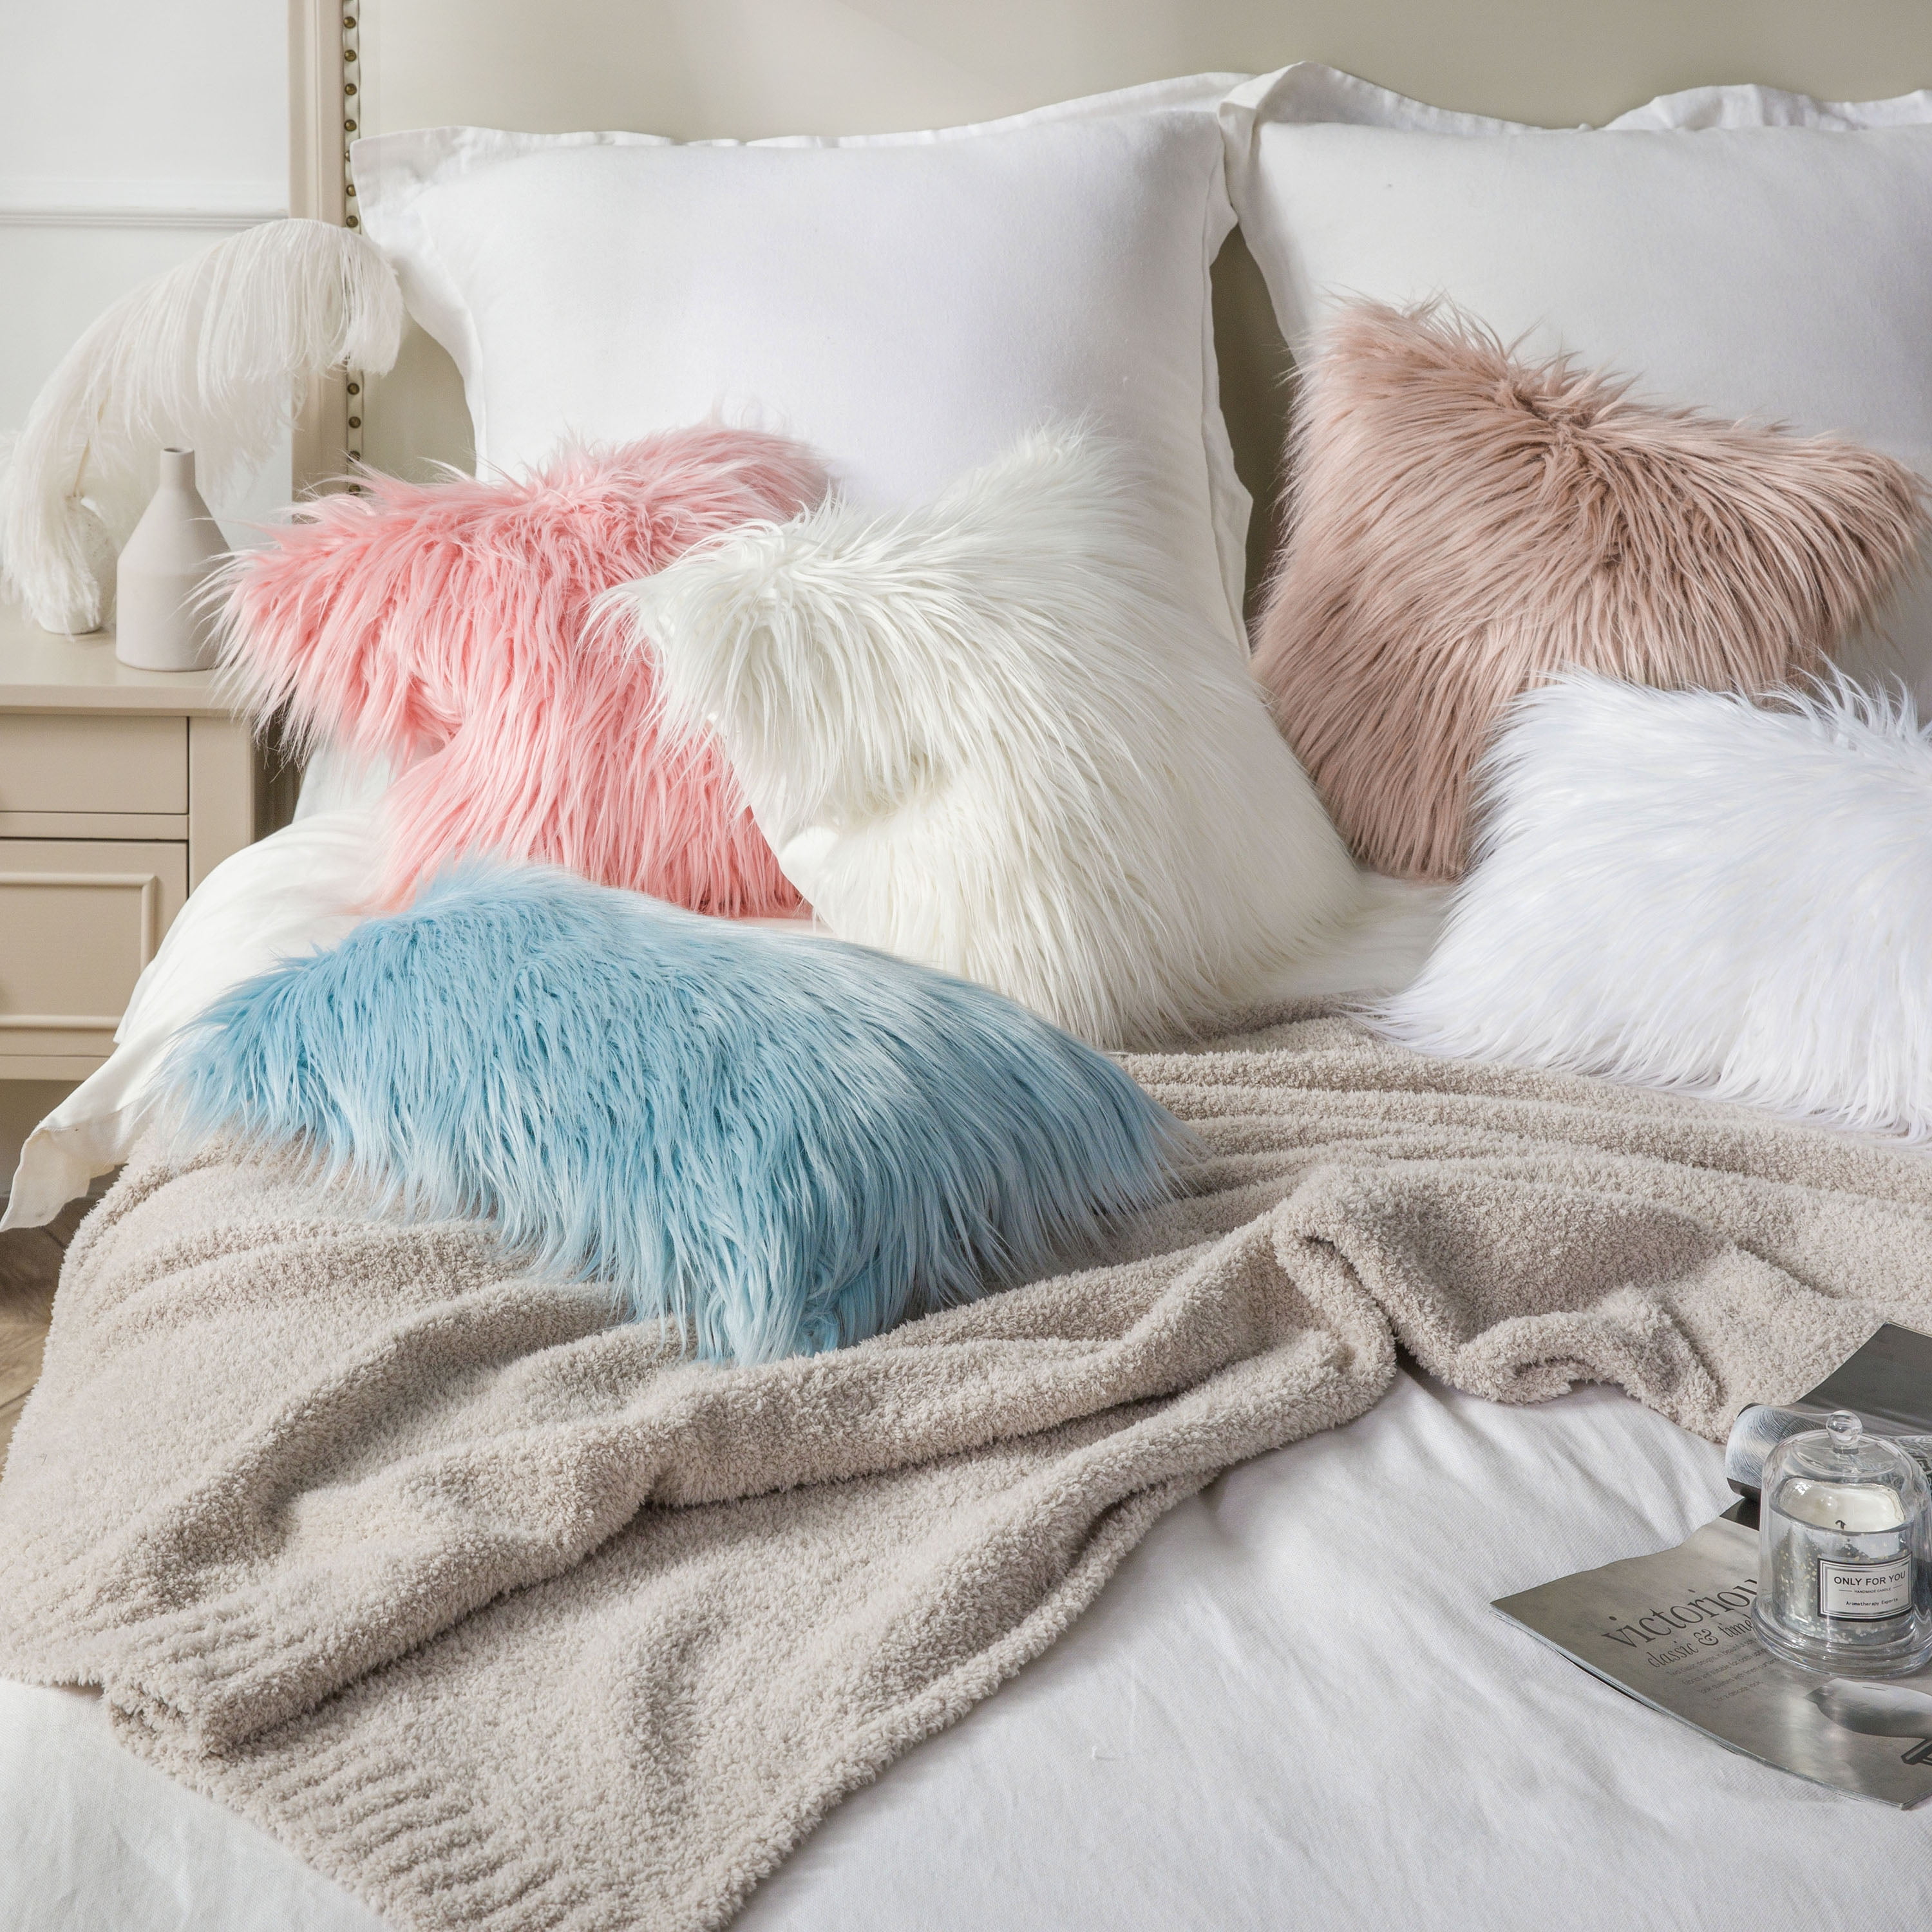 Luxury Mongolian Fluffy Faux Fur Series Square Decorative Throw Pillow  Cusion for Couch, 18 x 18, Pink, 2 Pack 